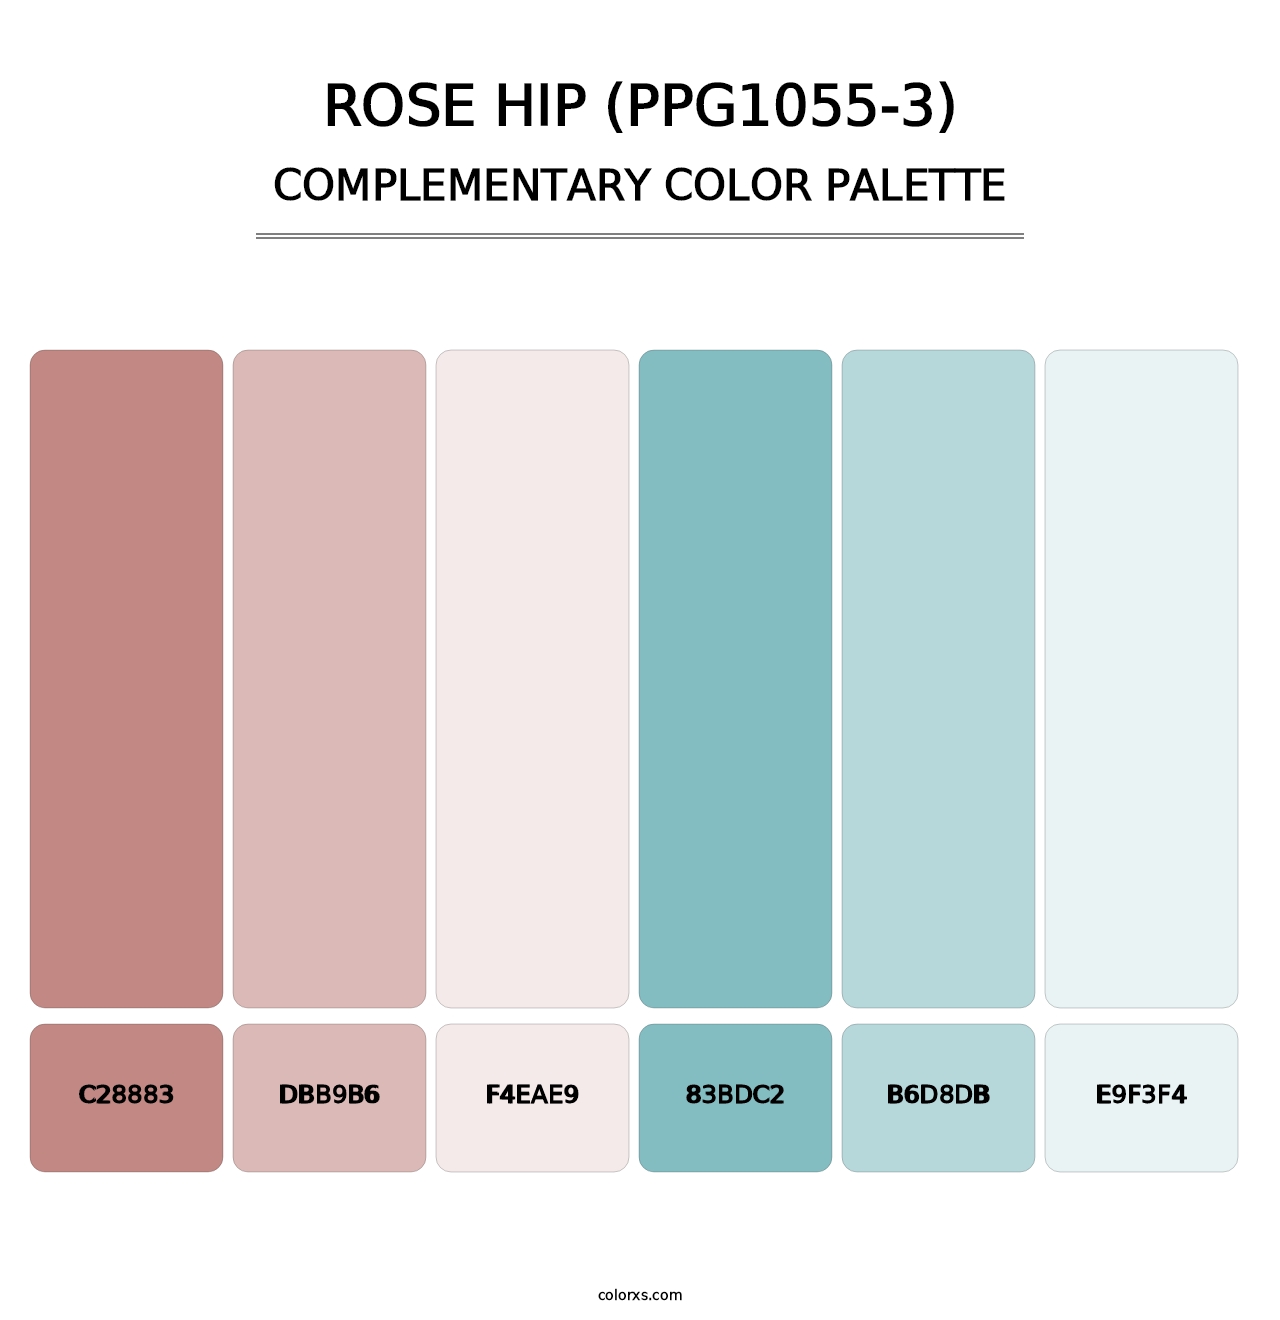 Rose Hip (PPG1055-3) - Complementary Color Palette